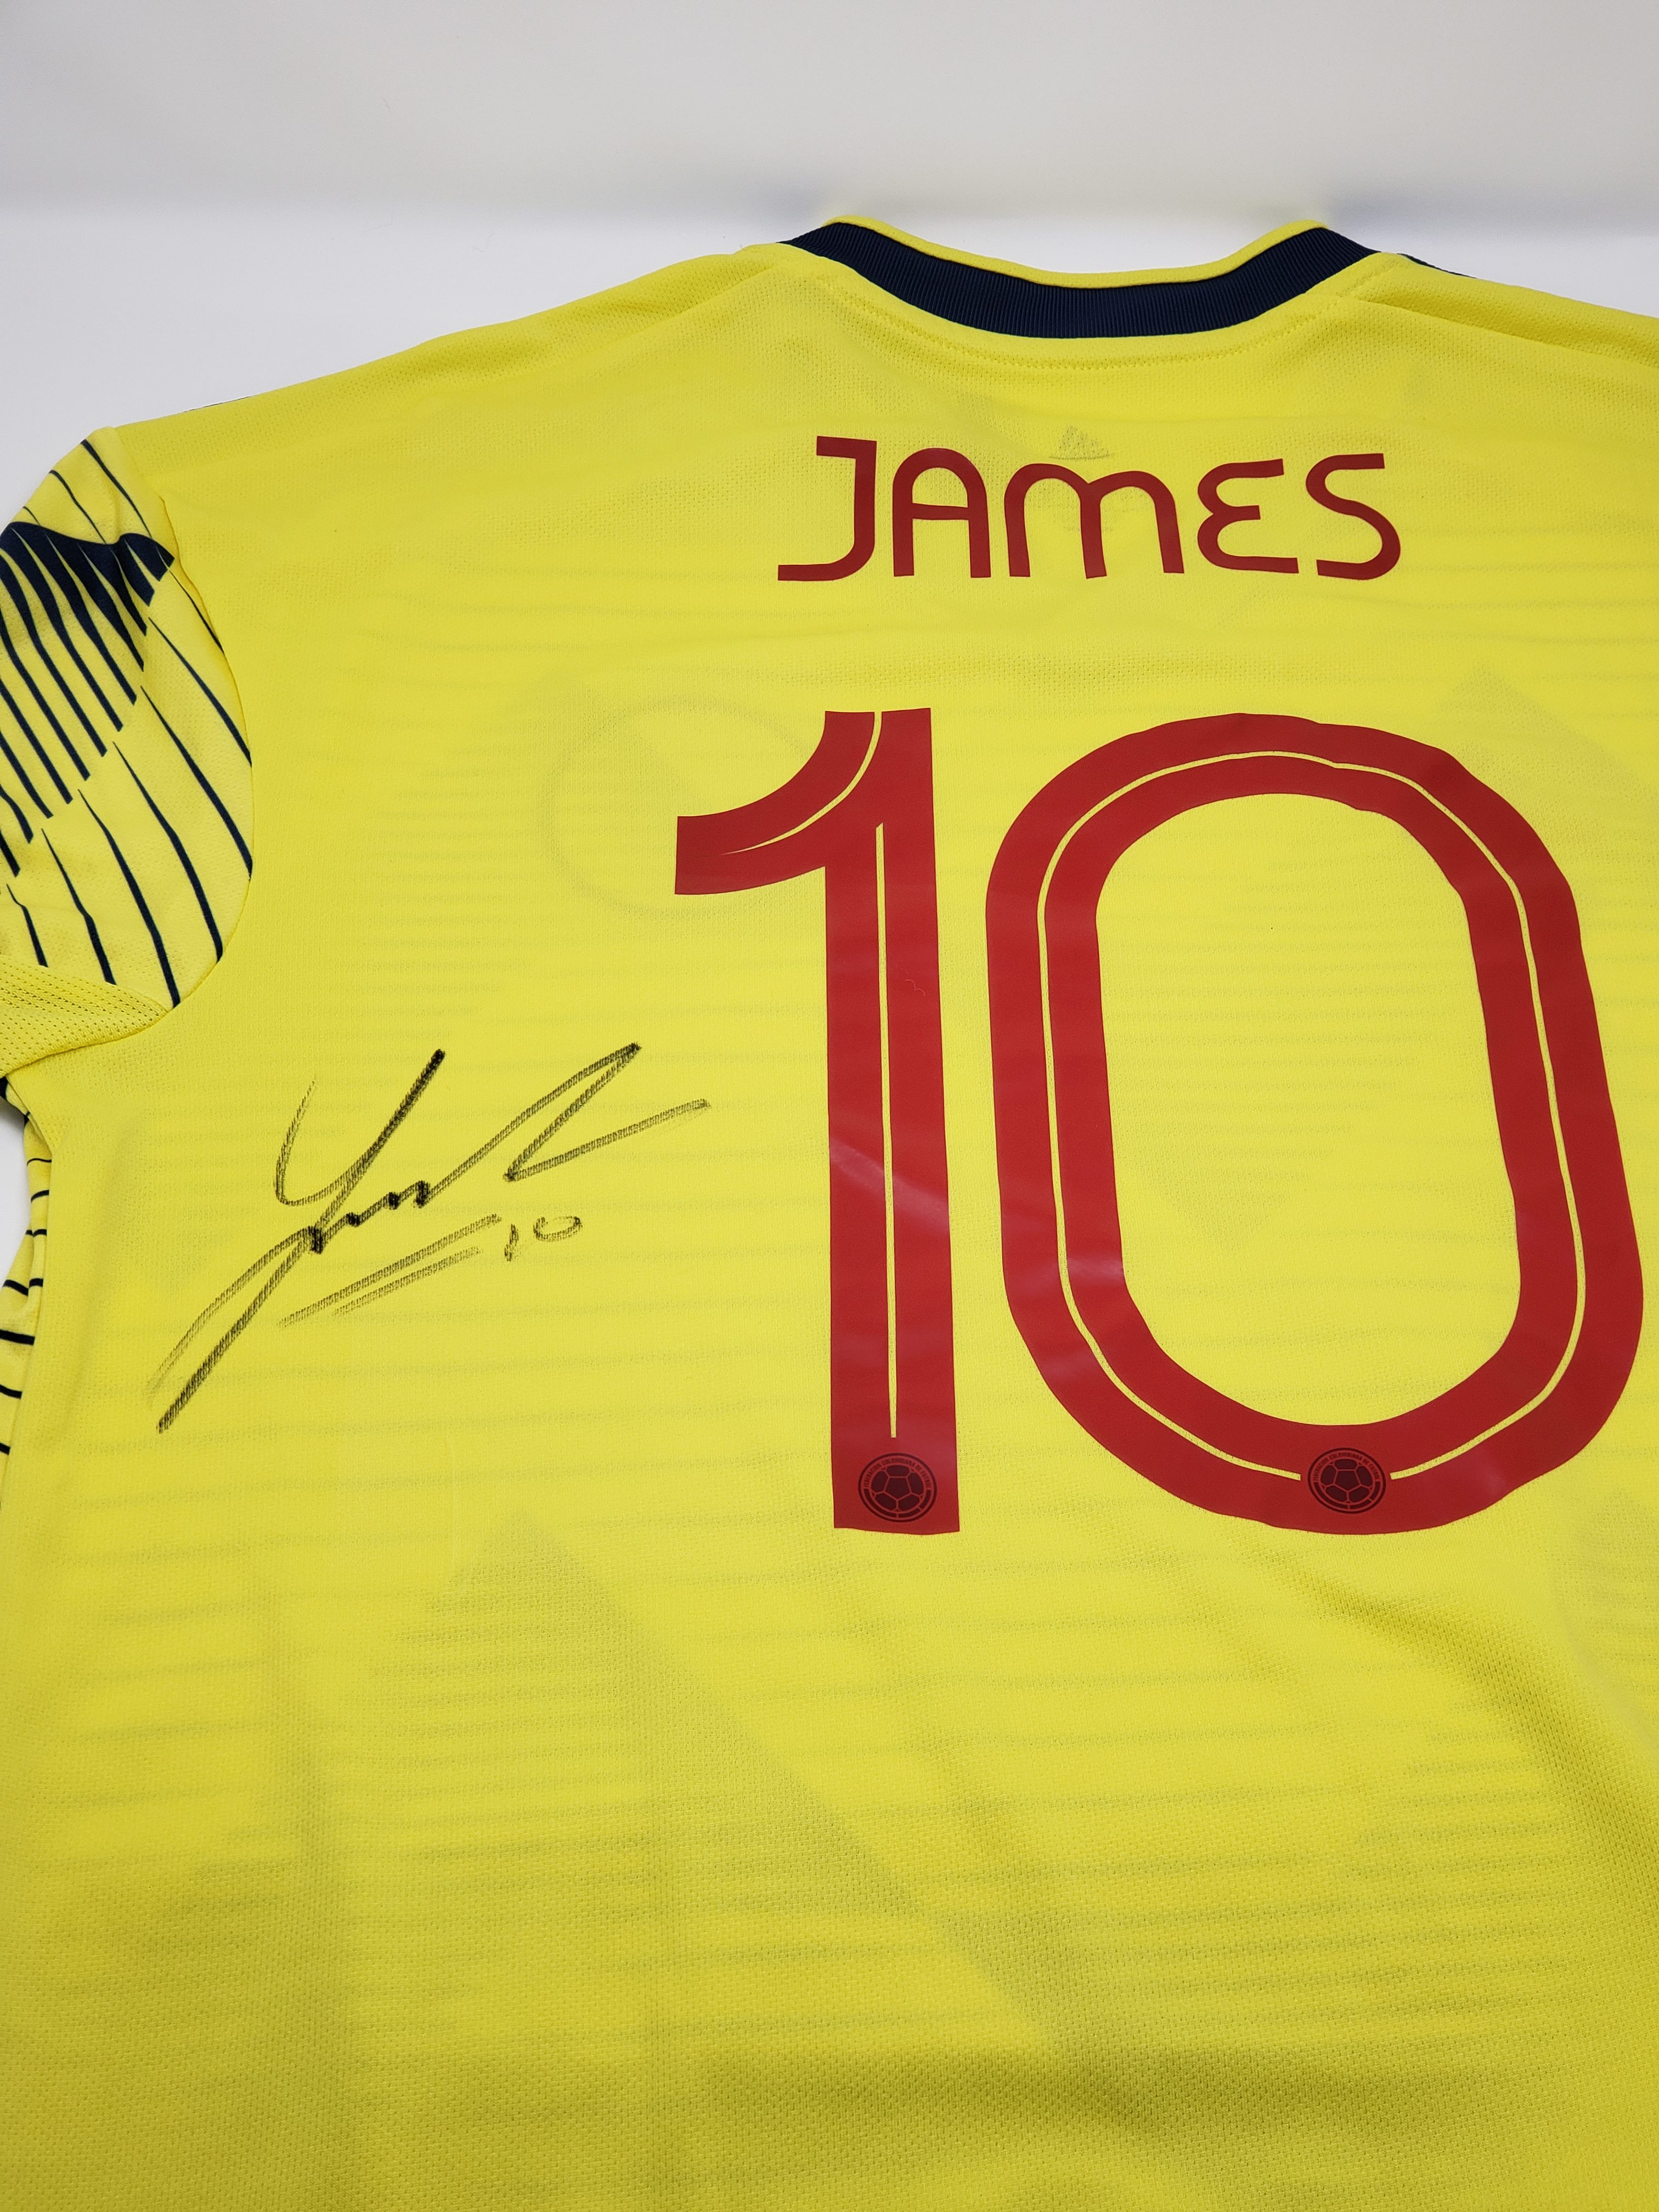 Autographed Colombia National Team Jersey | James Rodriguez #10